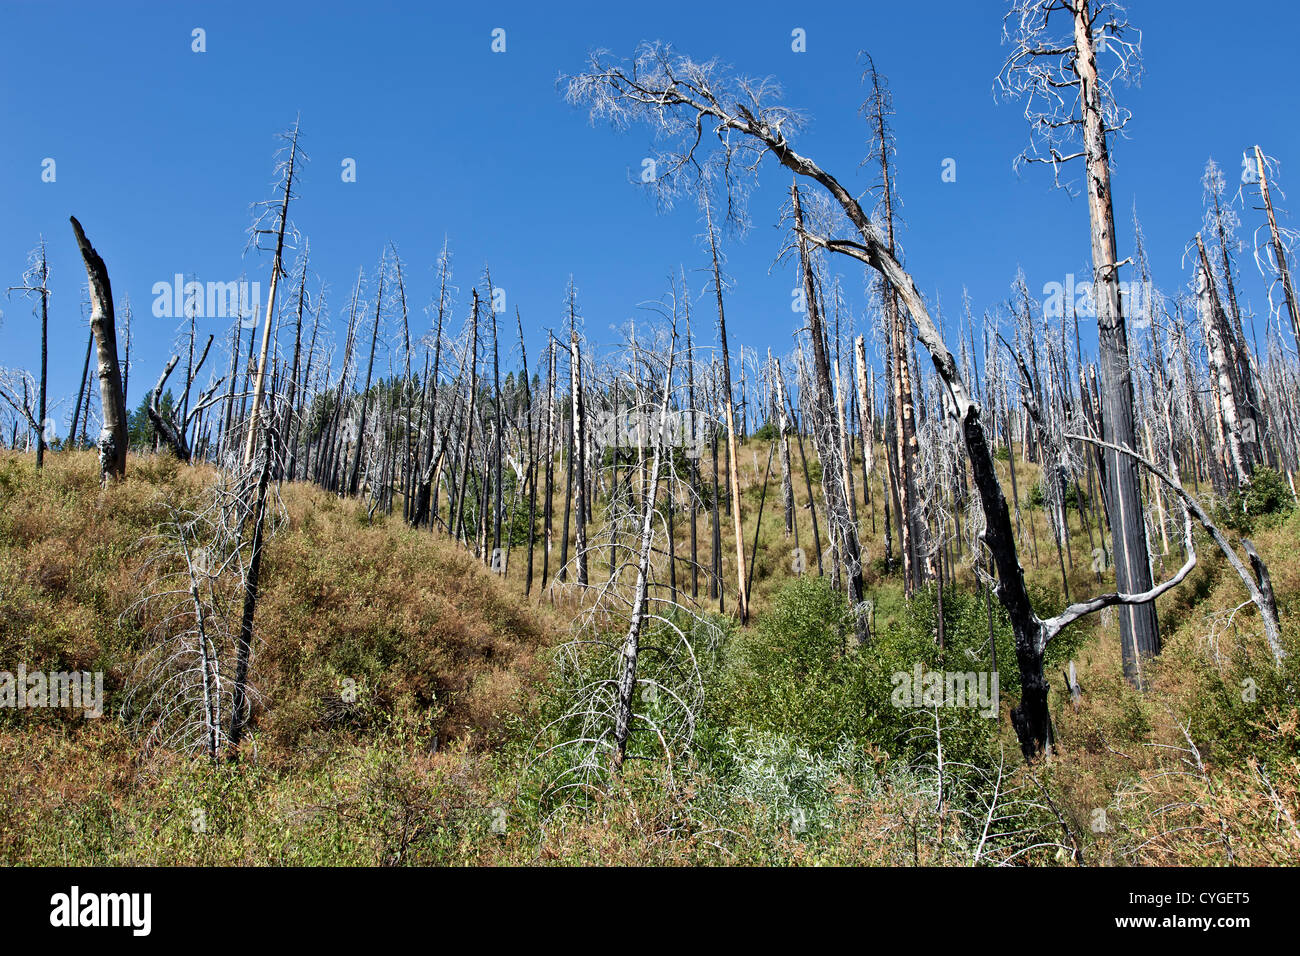 Remains of a forest fire, White Fir snags. Stock Photo